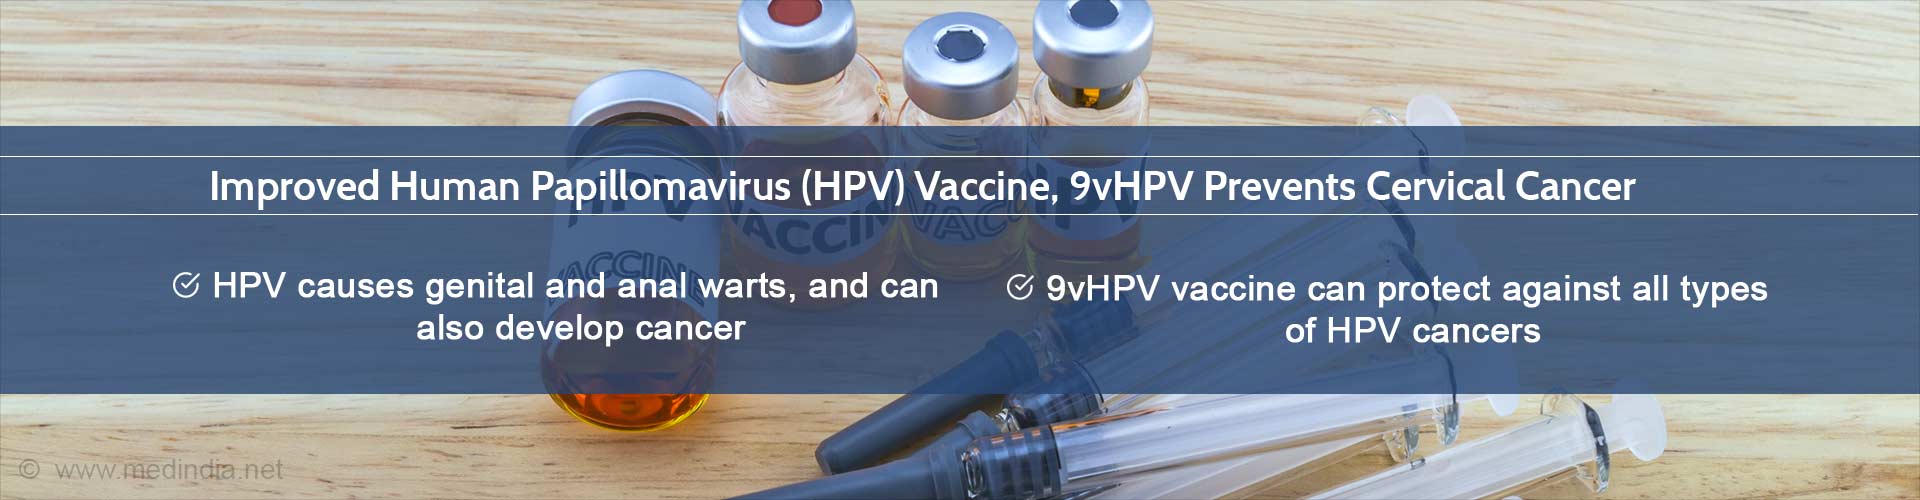 Improved Human Papillomavirus Vaccine (HPV), 9vHPV Prevents Cervical Cancer
- HPV causes genital and anal warts, and can also develop cancer
- 9vHPV vaccine can protect against all types of HPV cancers